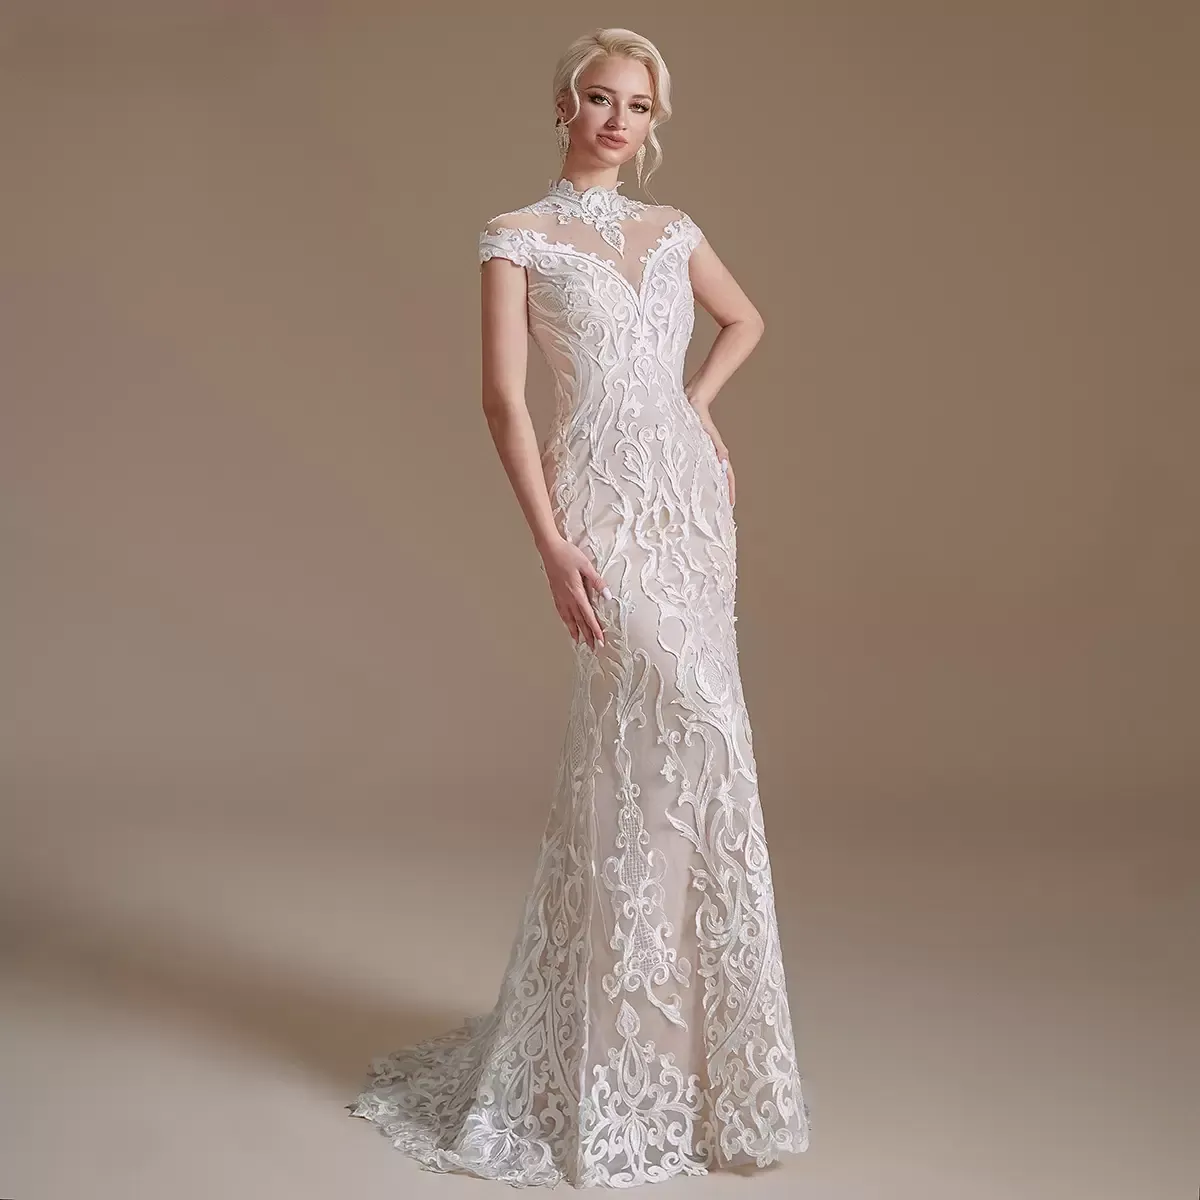 2022 Vestido De Noiva Lace Wedding Dresses For Women Sleeveless High-Neck Beads Crystal Bridal Gowns Mariage Bride Dresses CPS1990